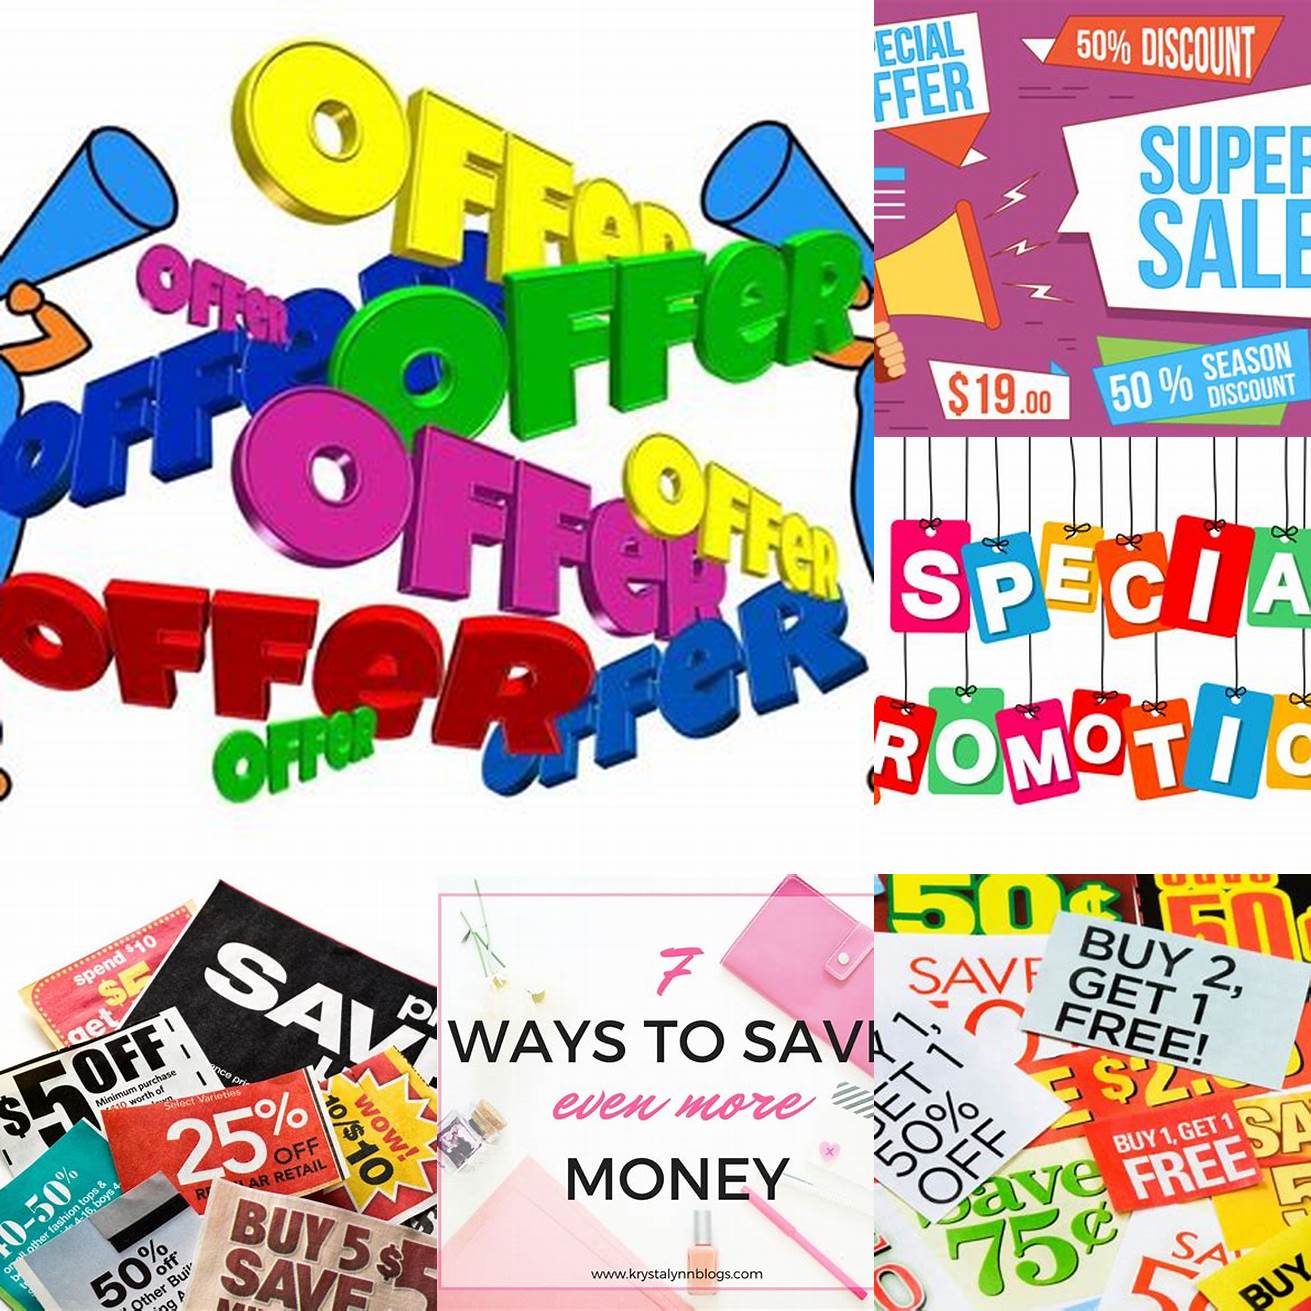 3 Take advantage of sales and promotions to save even more money on your childs school wardrobe